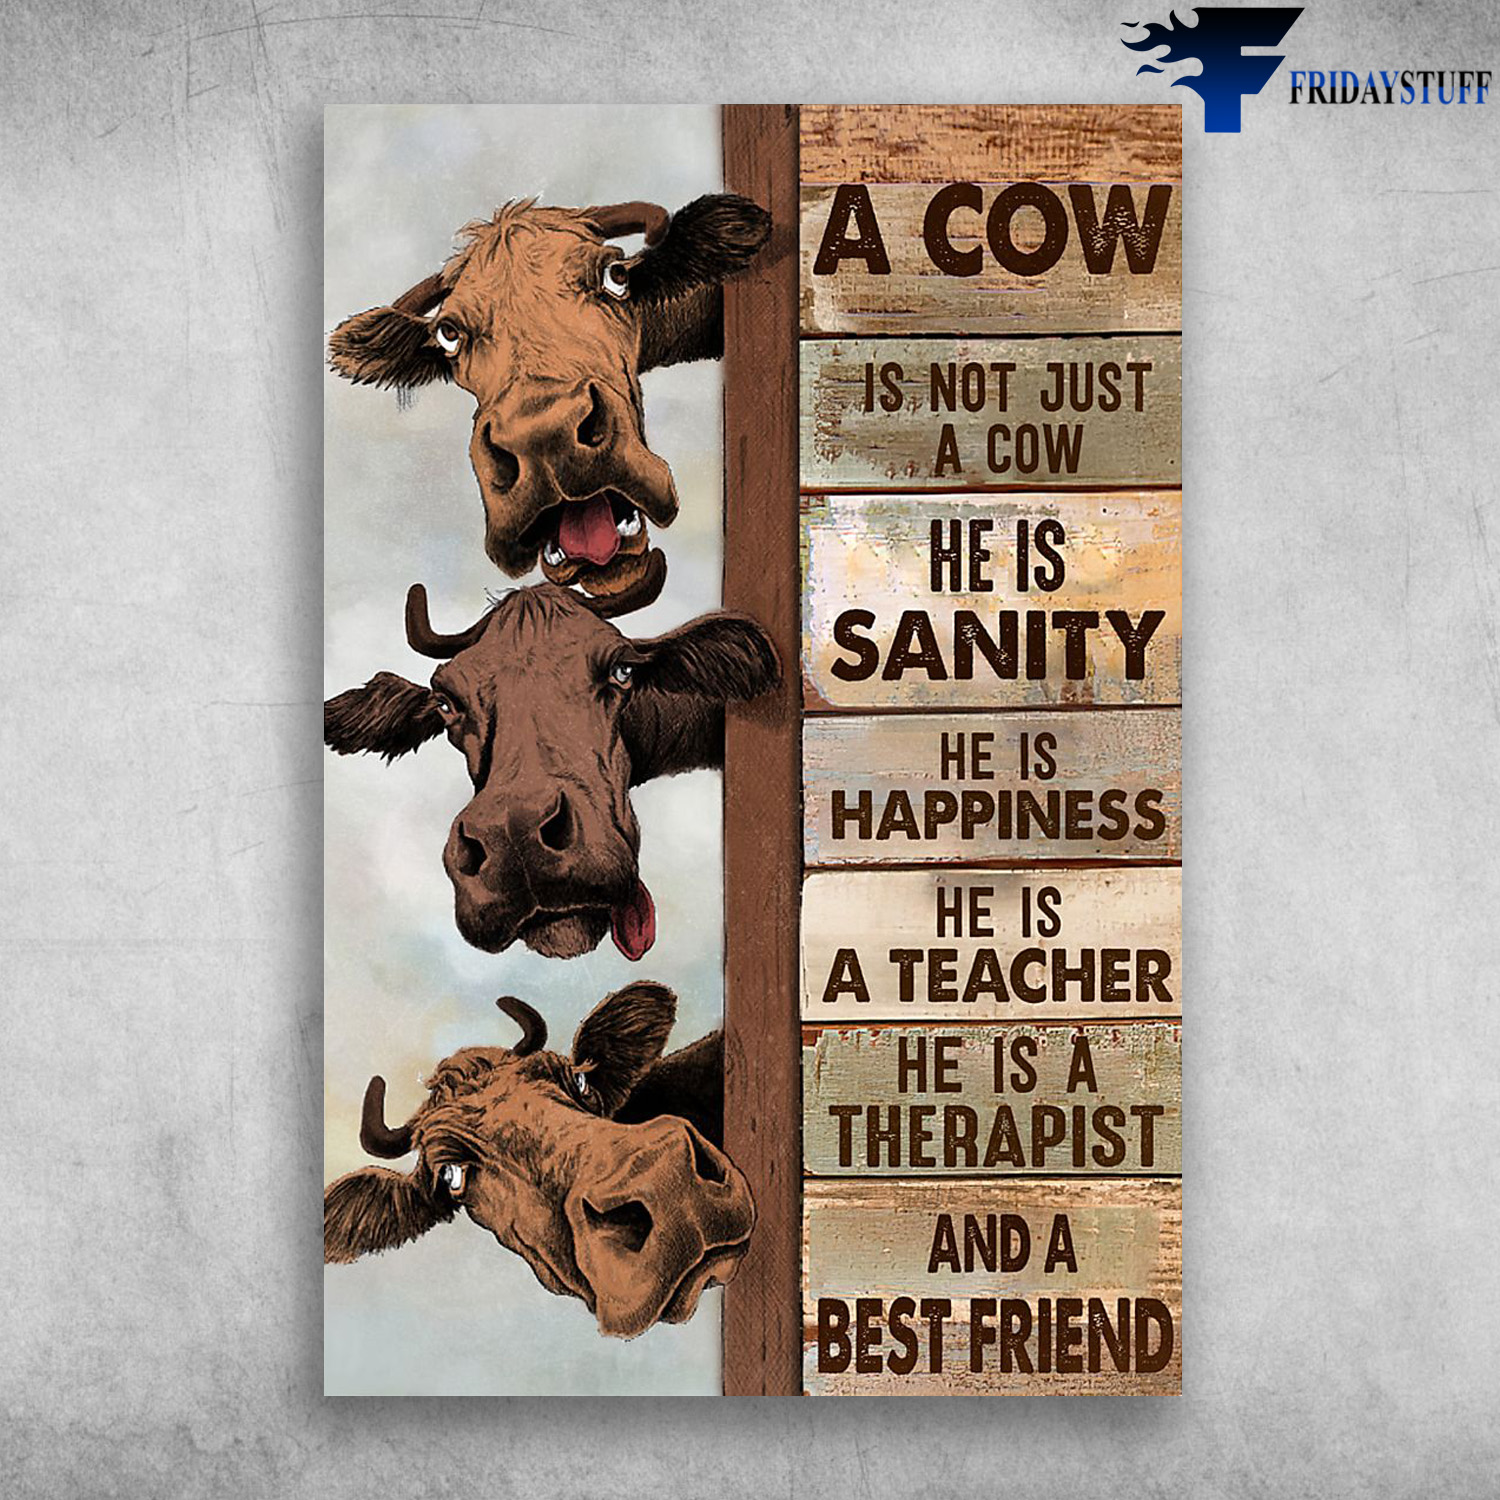 The Cows - A Cow Is Not Just A Cow, He Is Sanity, He Is Happiness, He Is Happiness, He Is A Teacher, He Is A Therapist, And A Best Friend